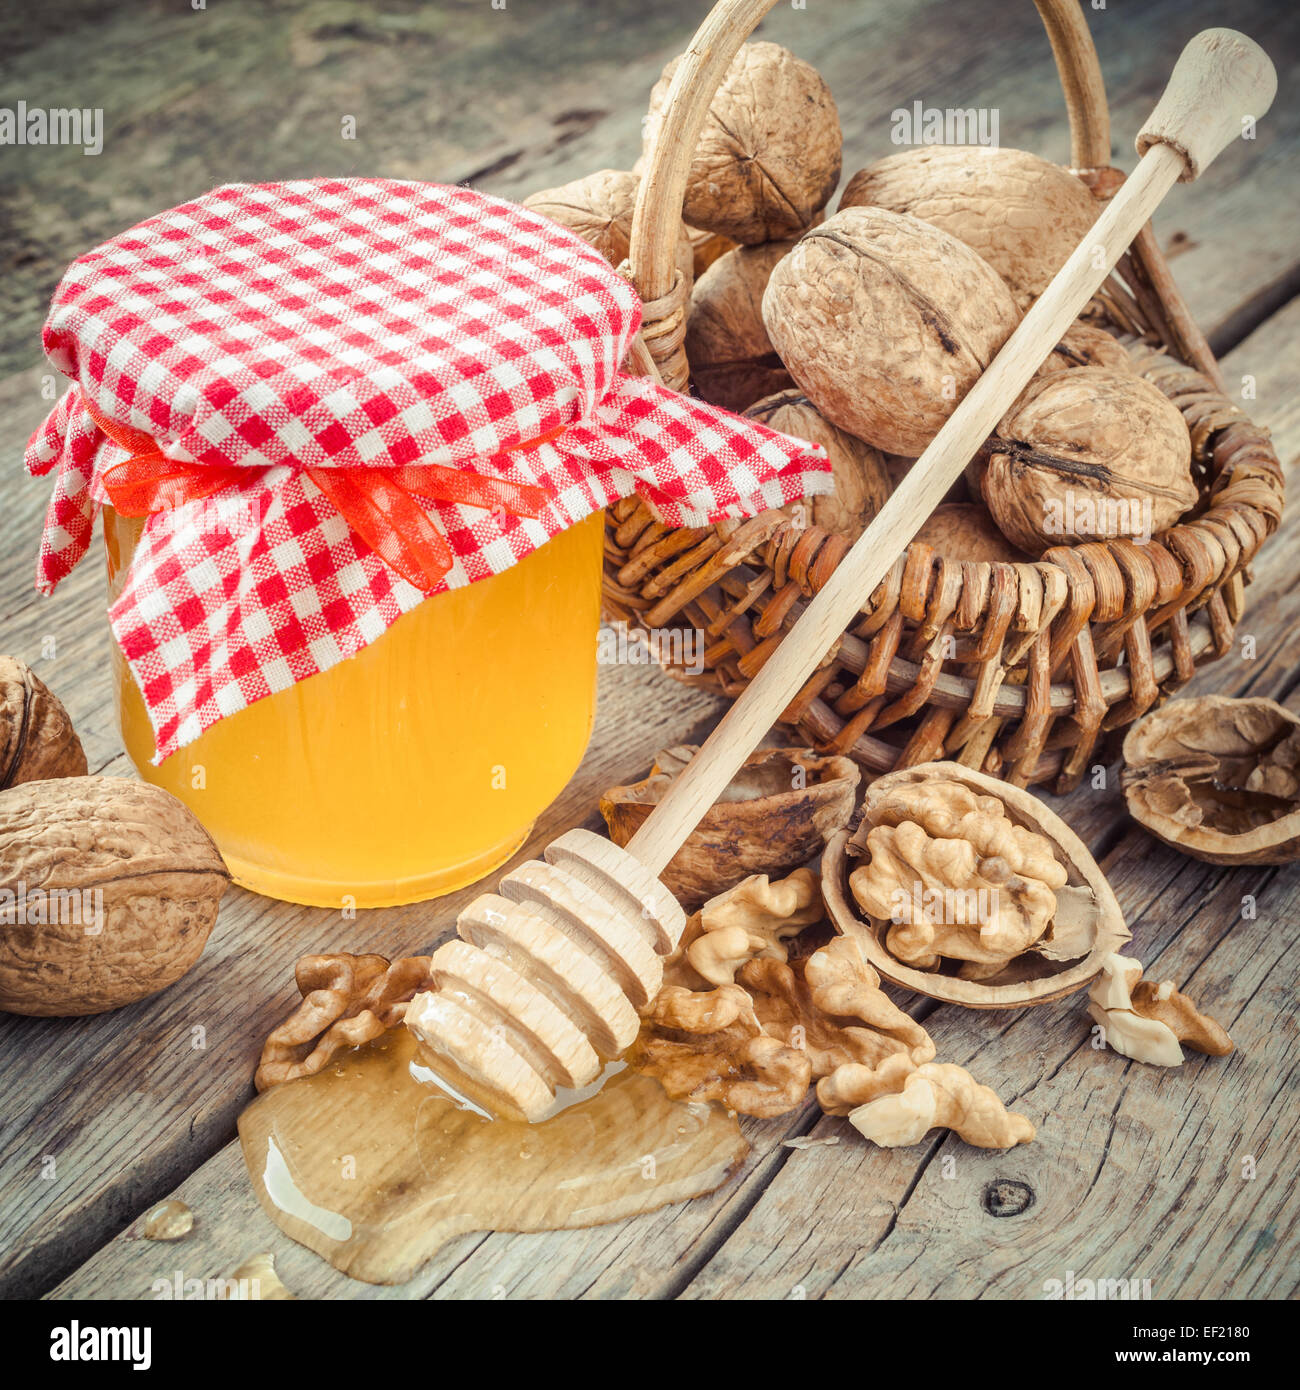 Honey in jar, walnut in basket and wooden dipper on old kitchen table Stock Photo